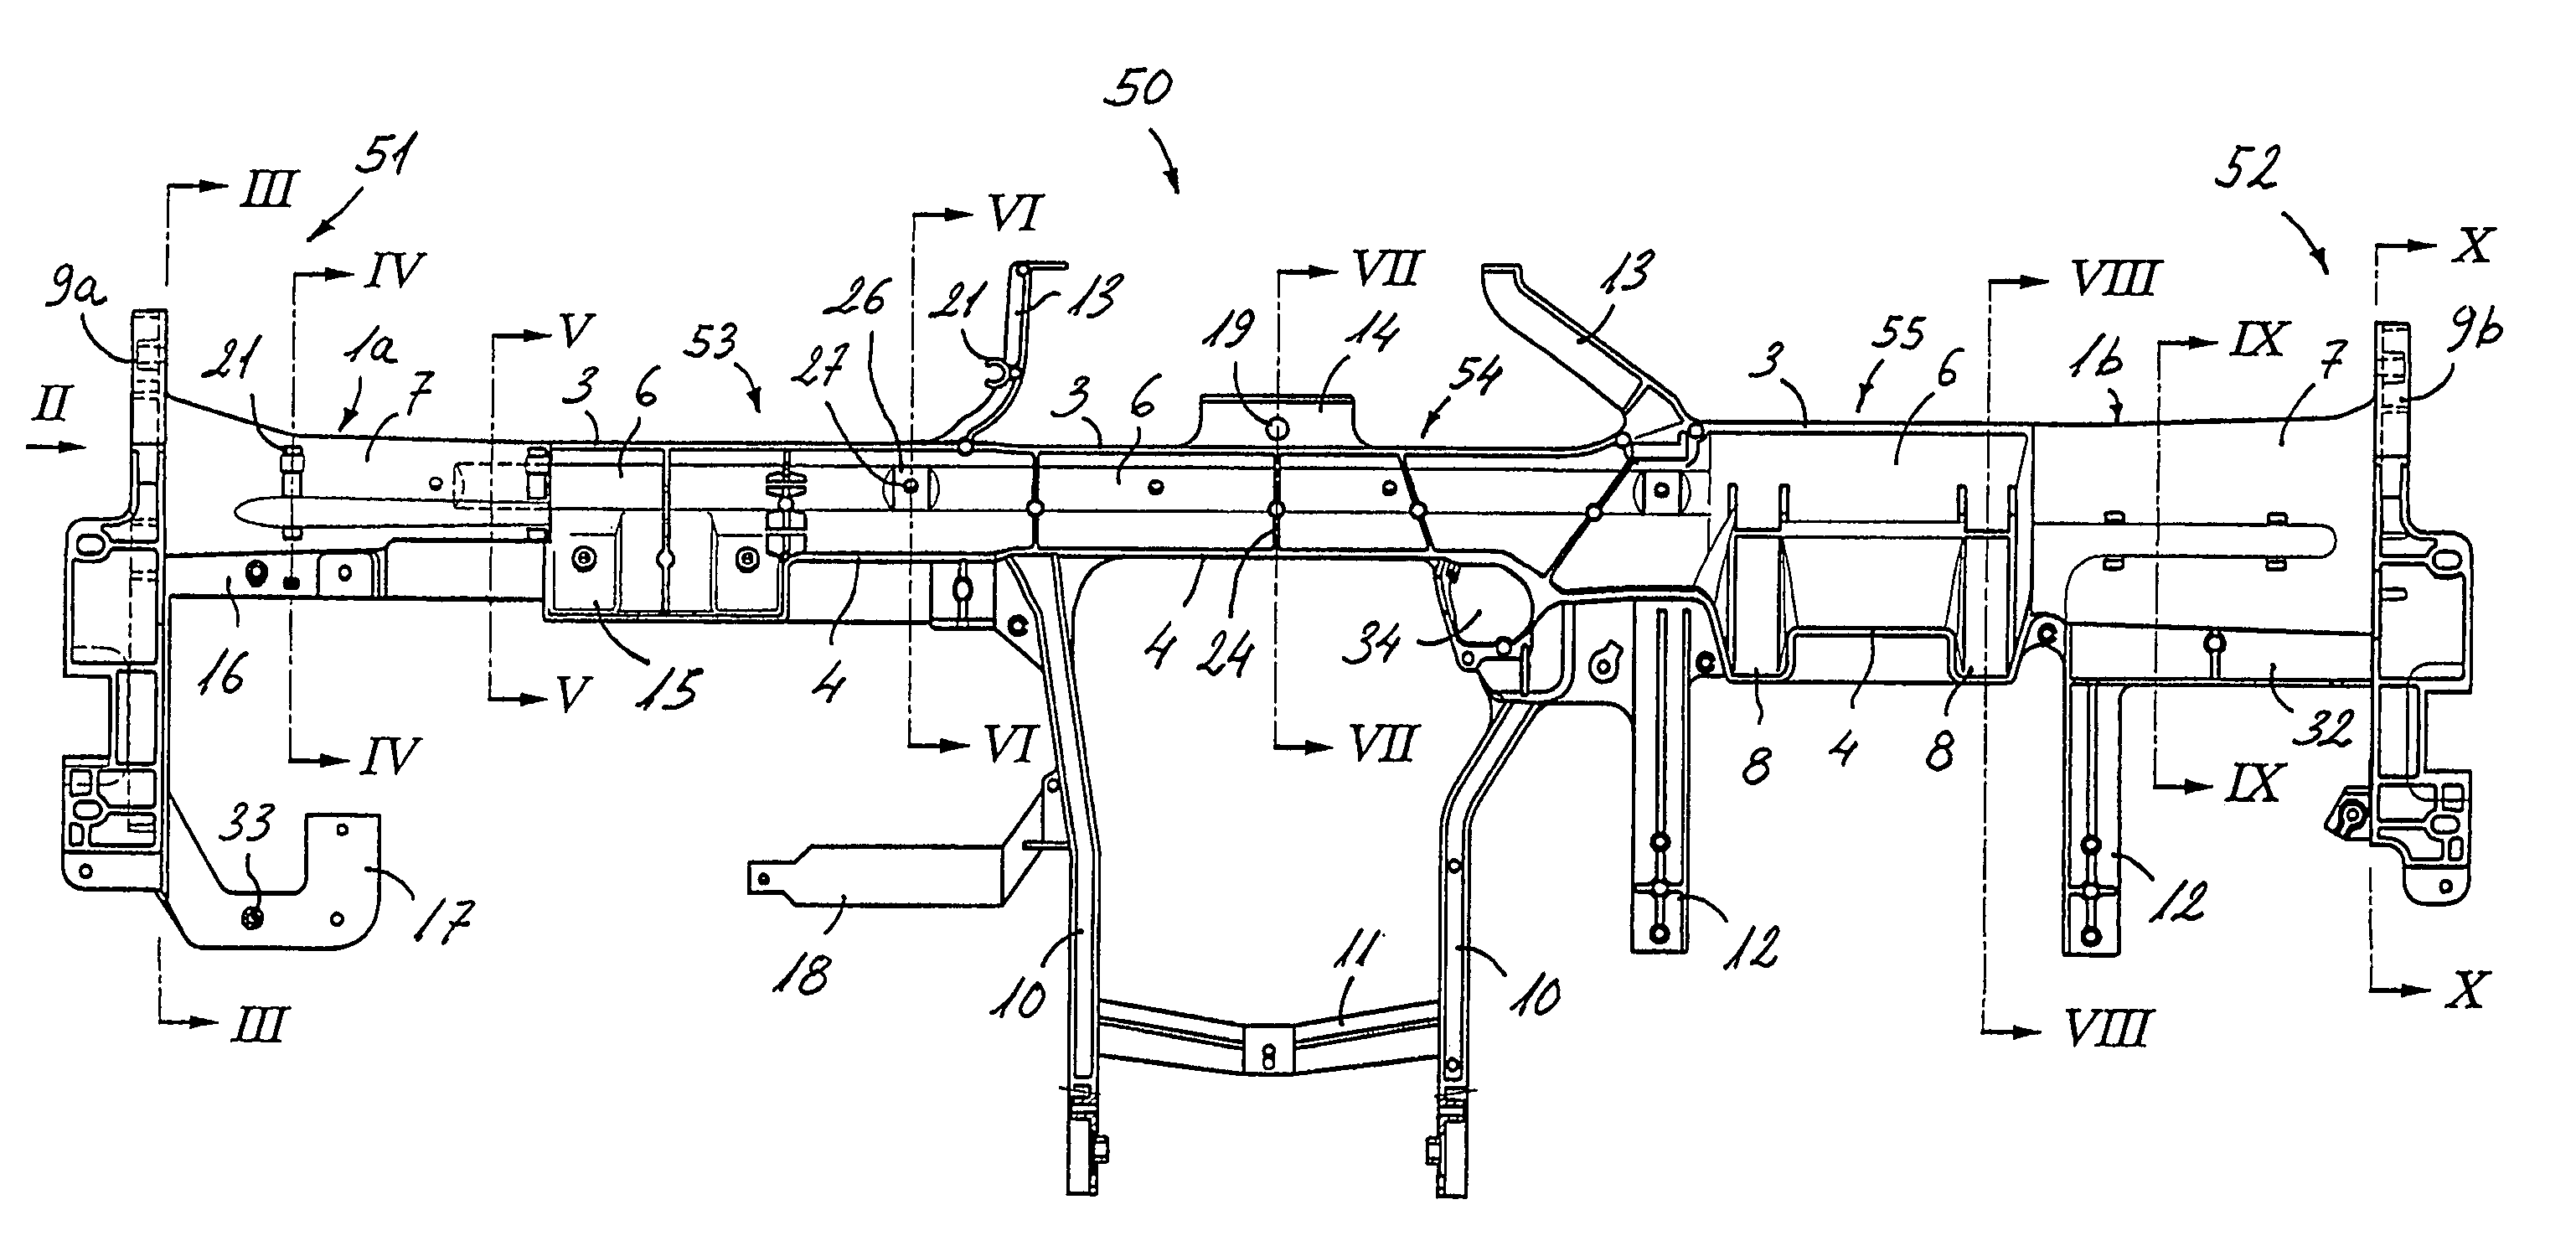 Support crossbeam for an instrument panel